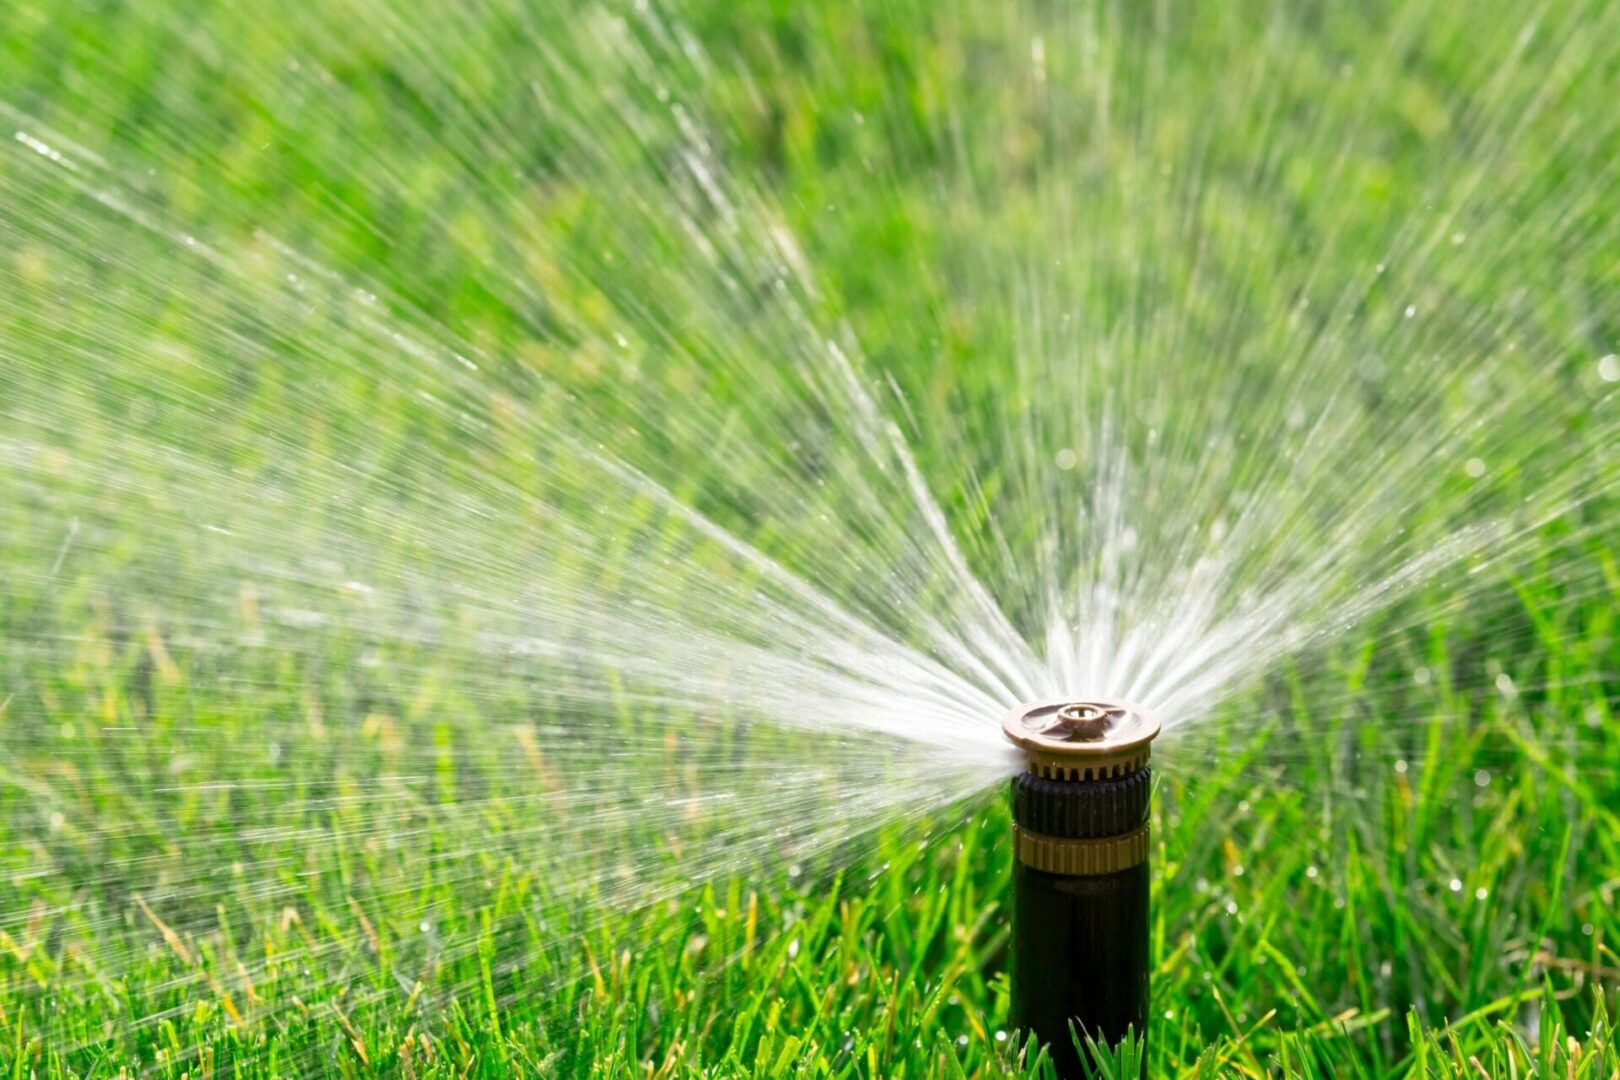 A water sprinkler spraying out of the ground.